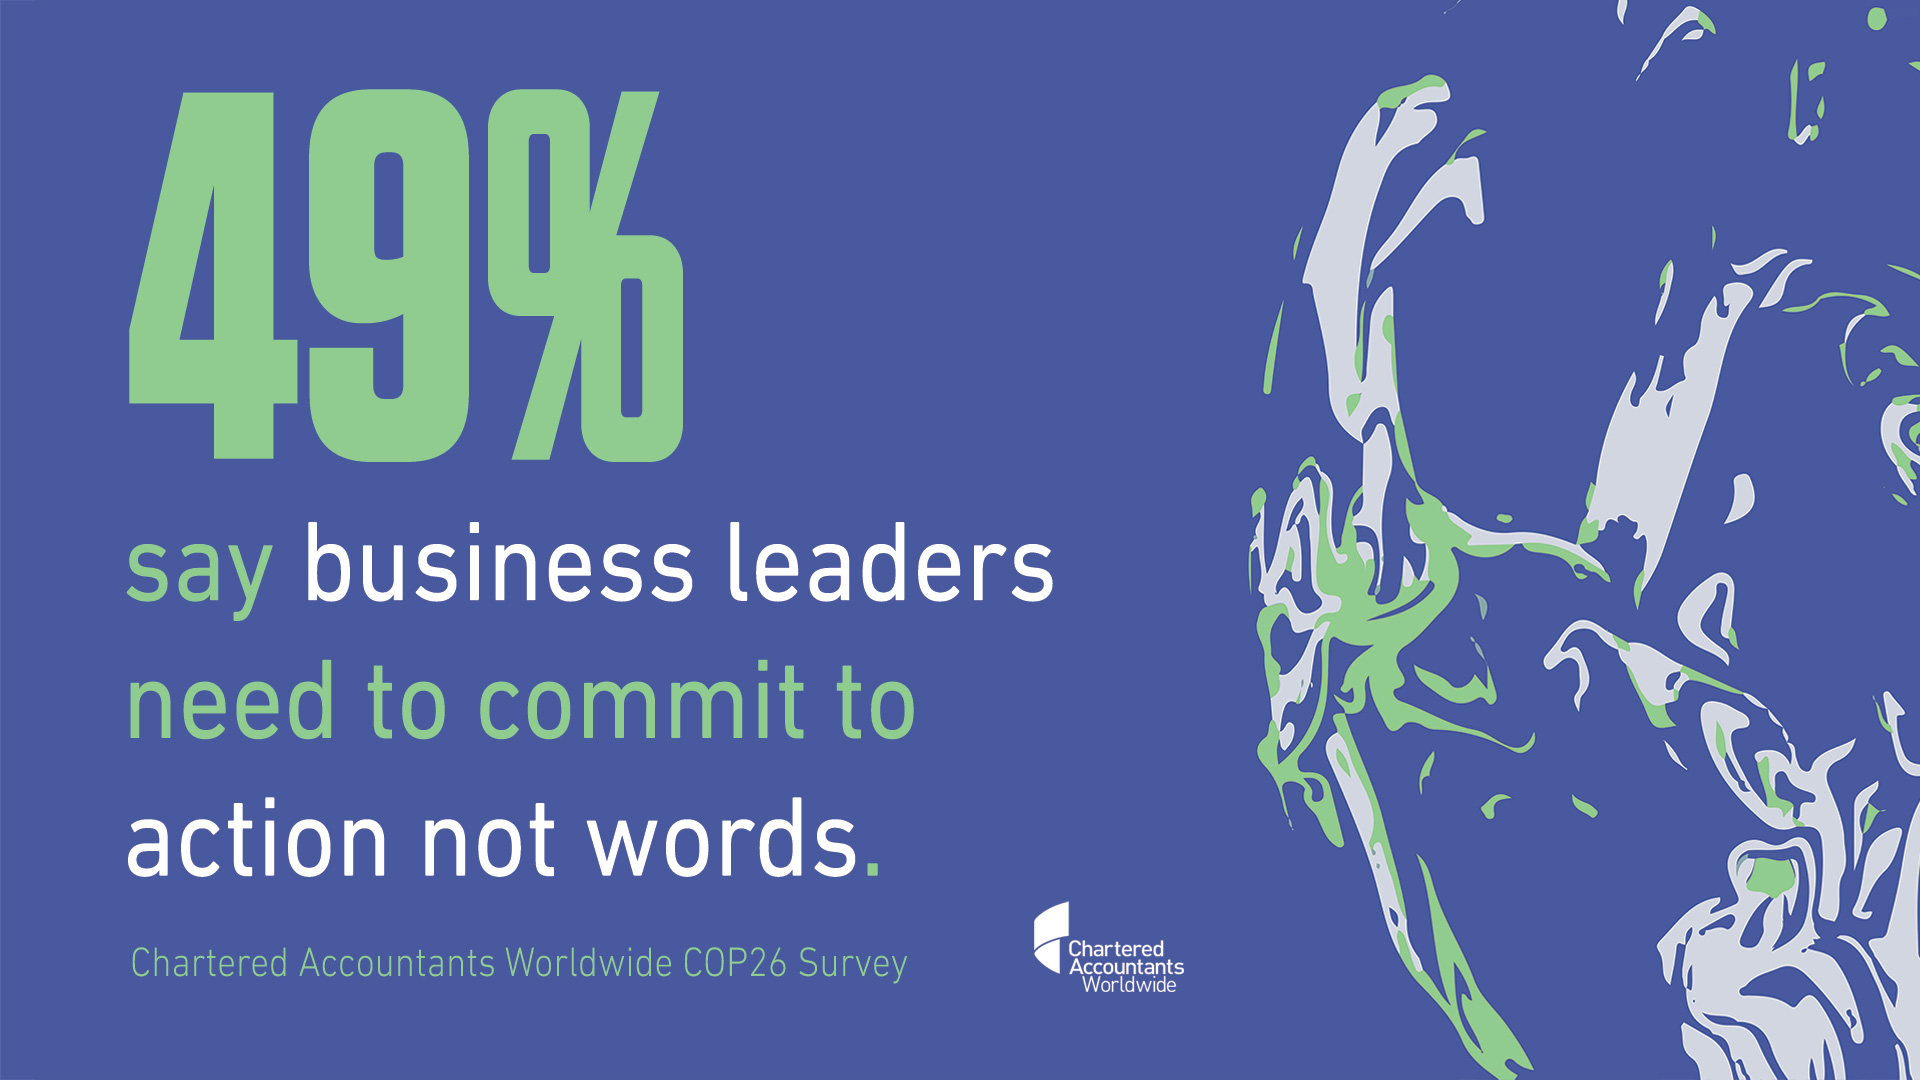 49% so business leaders need to commit to action not words